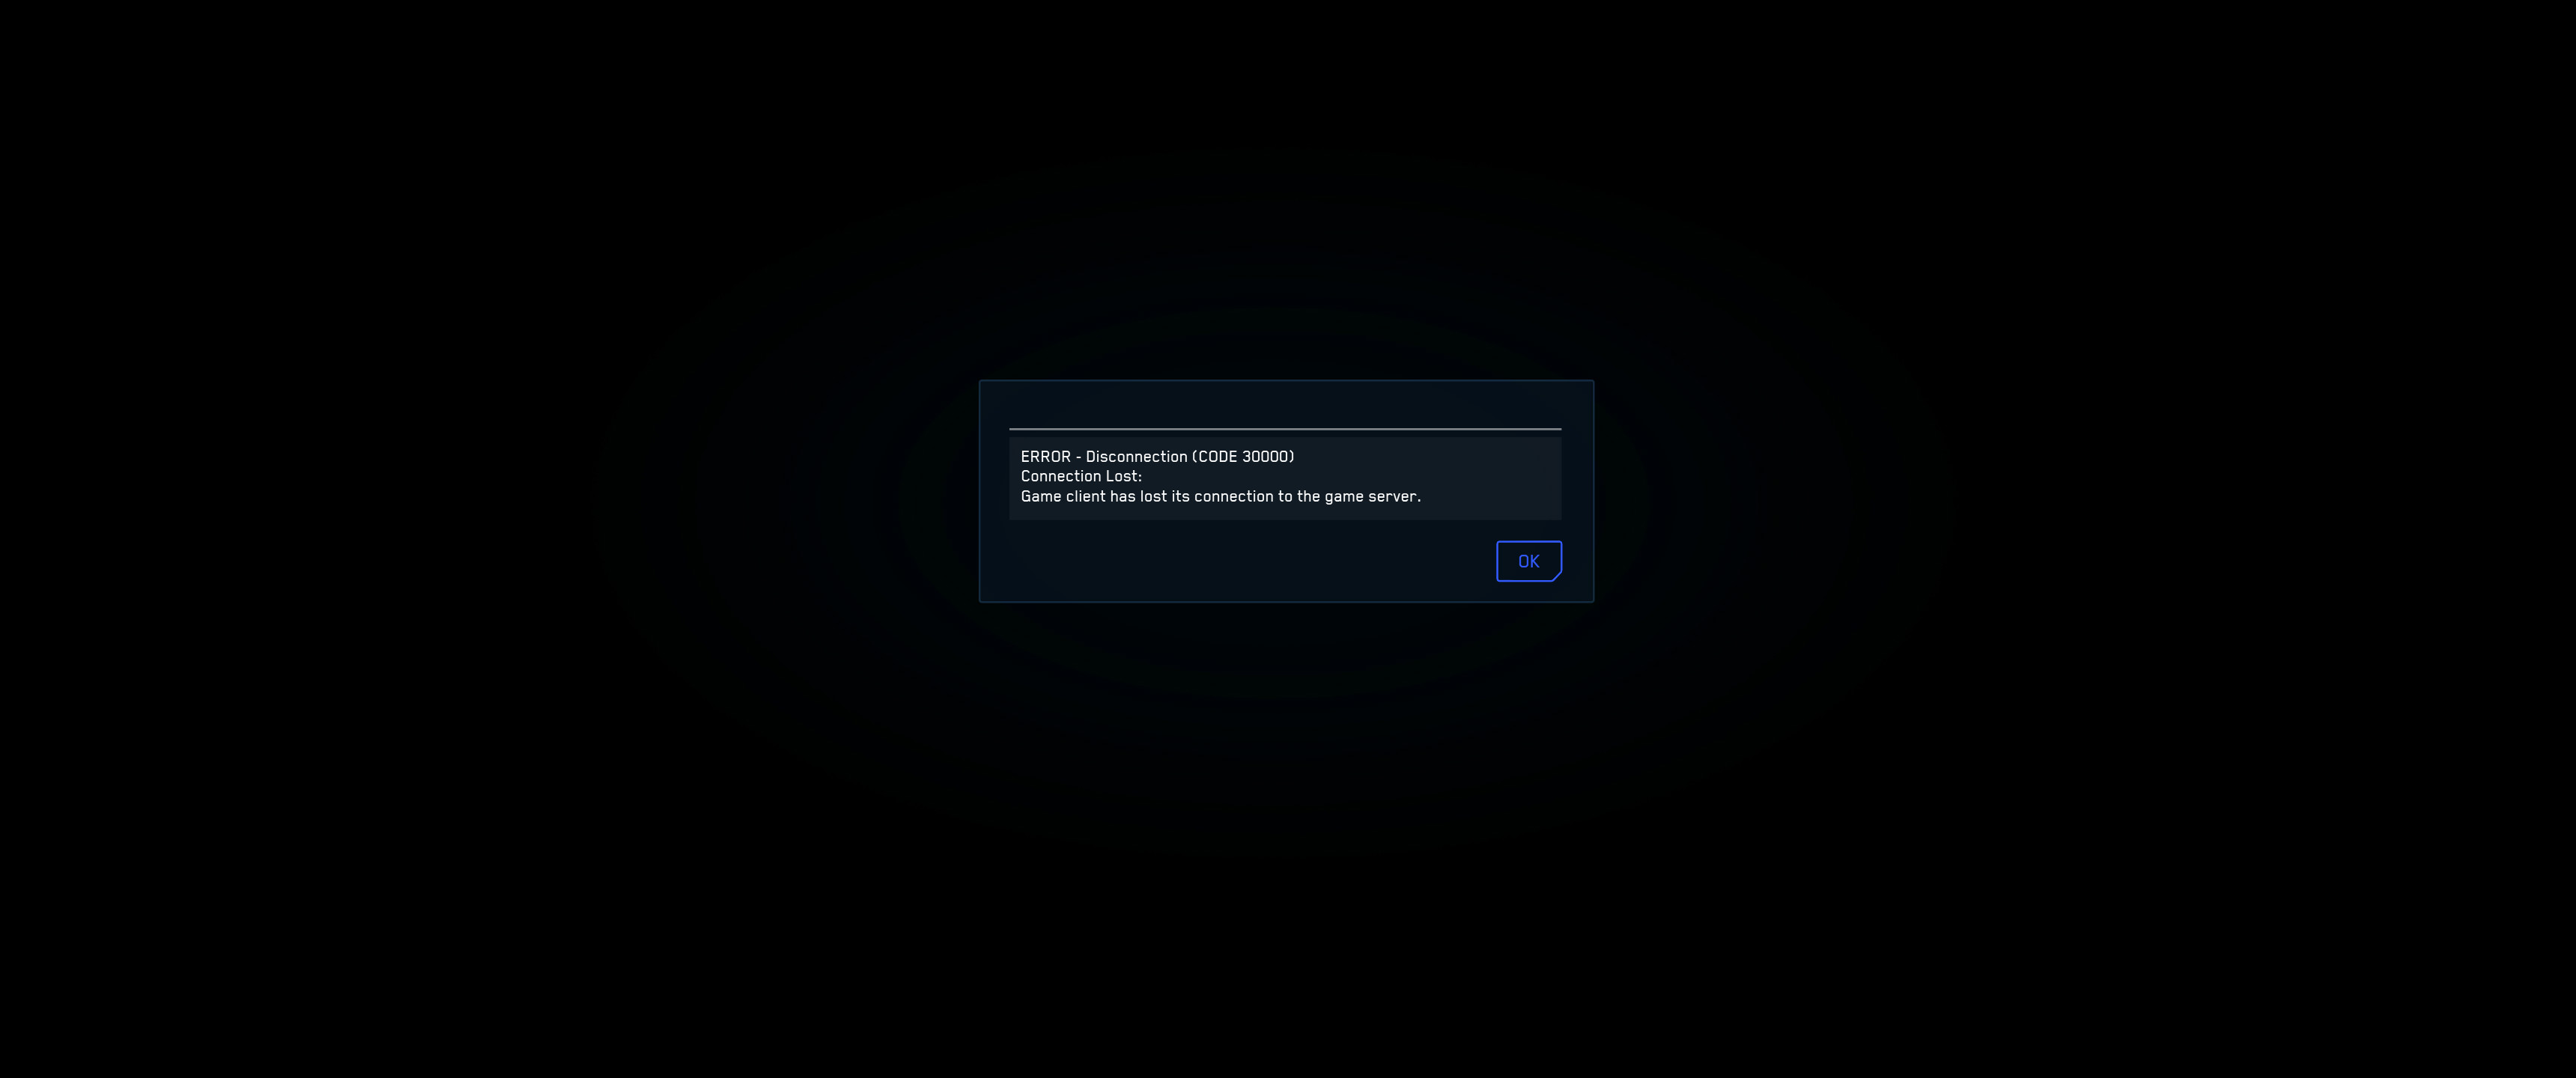 Screenshot of loading menu with a 30000 error message: “connection lost”